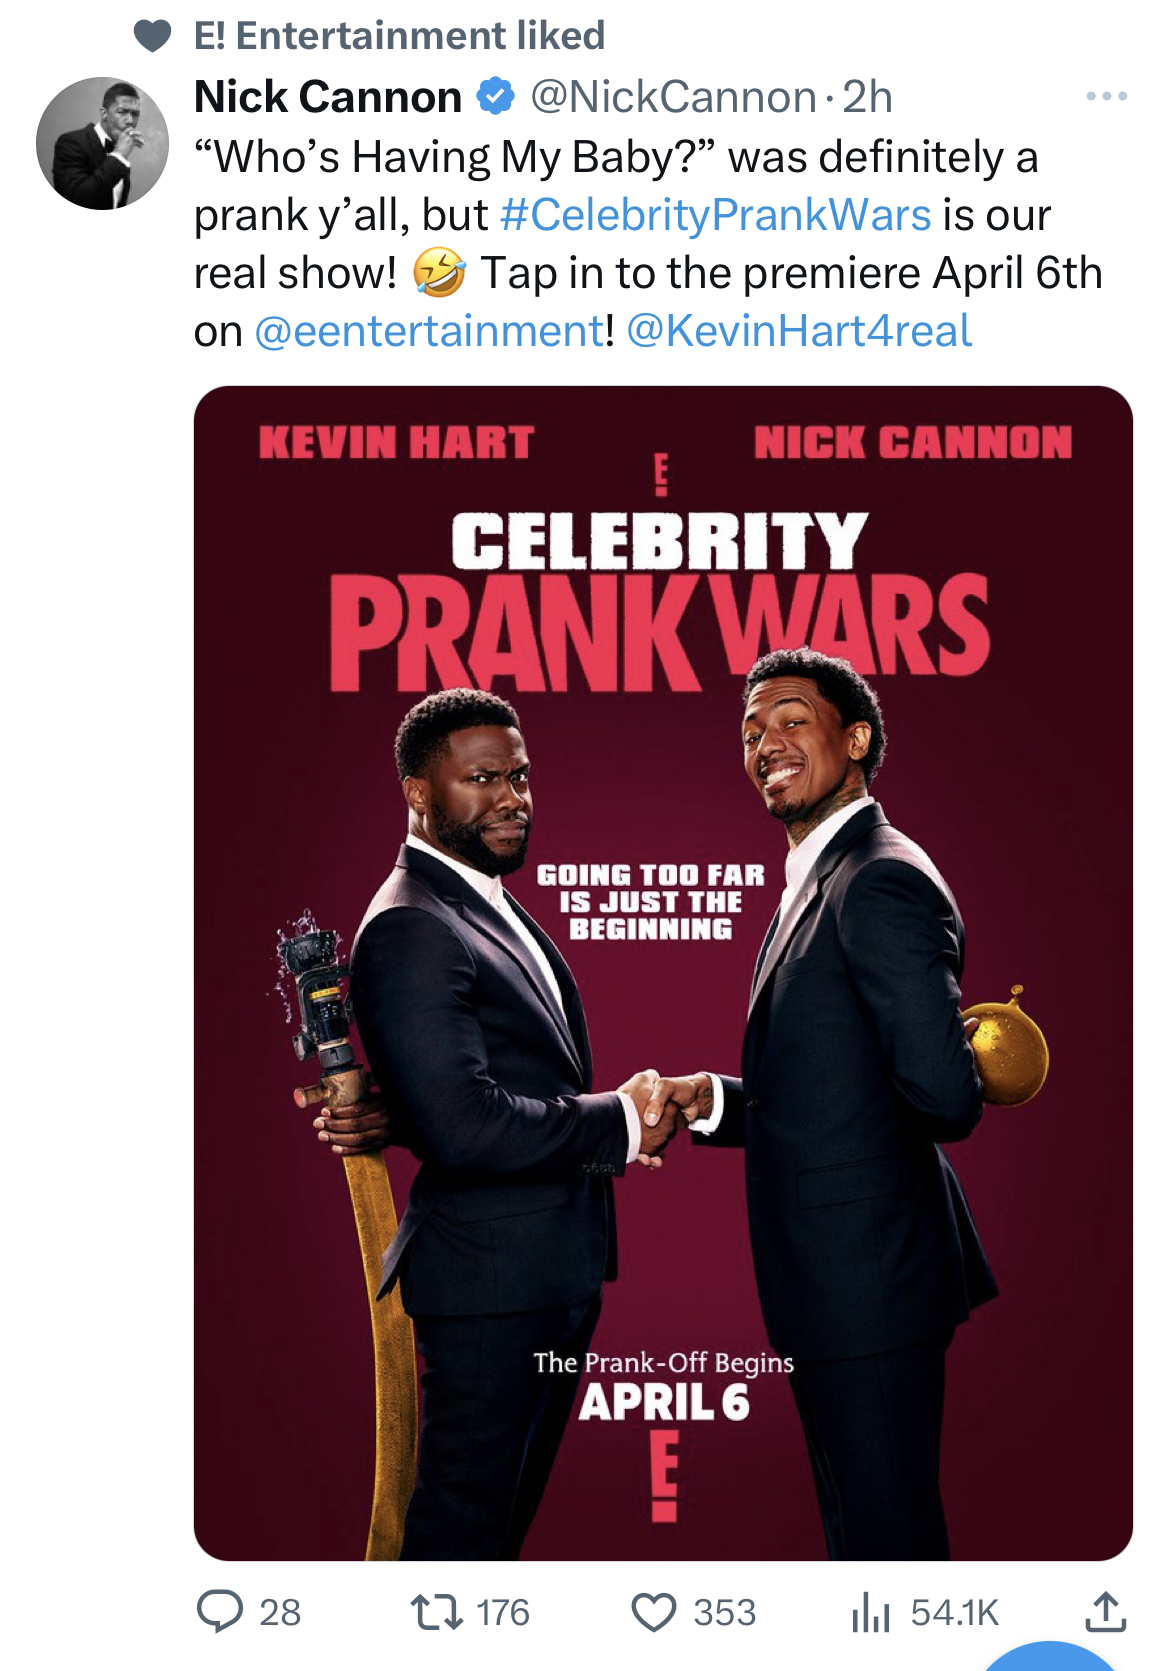 funny tweets - poster - E! Entertainment d Nick Cannon "Who's Having My Baby?" was definitely a prank y'all, but PrankWars is our real show! Tap in to the premiere April 6th on ! Kevin Hart Nick Cannon O 28 Celebrity Prank Wars 1176 Going Too Far Is Just 